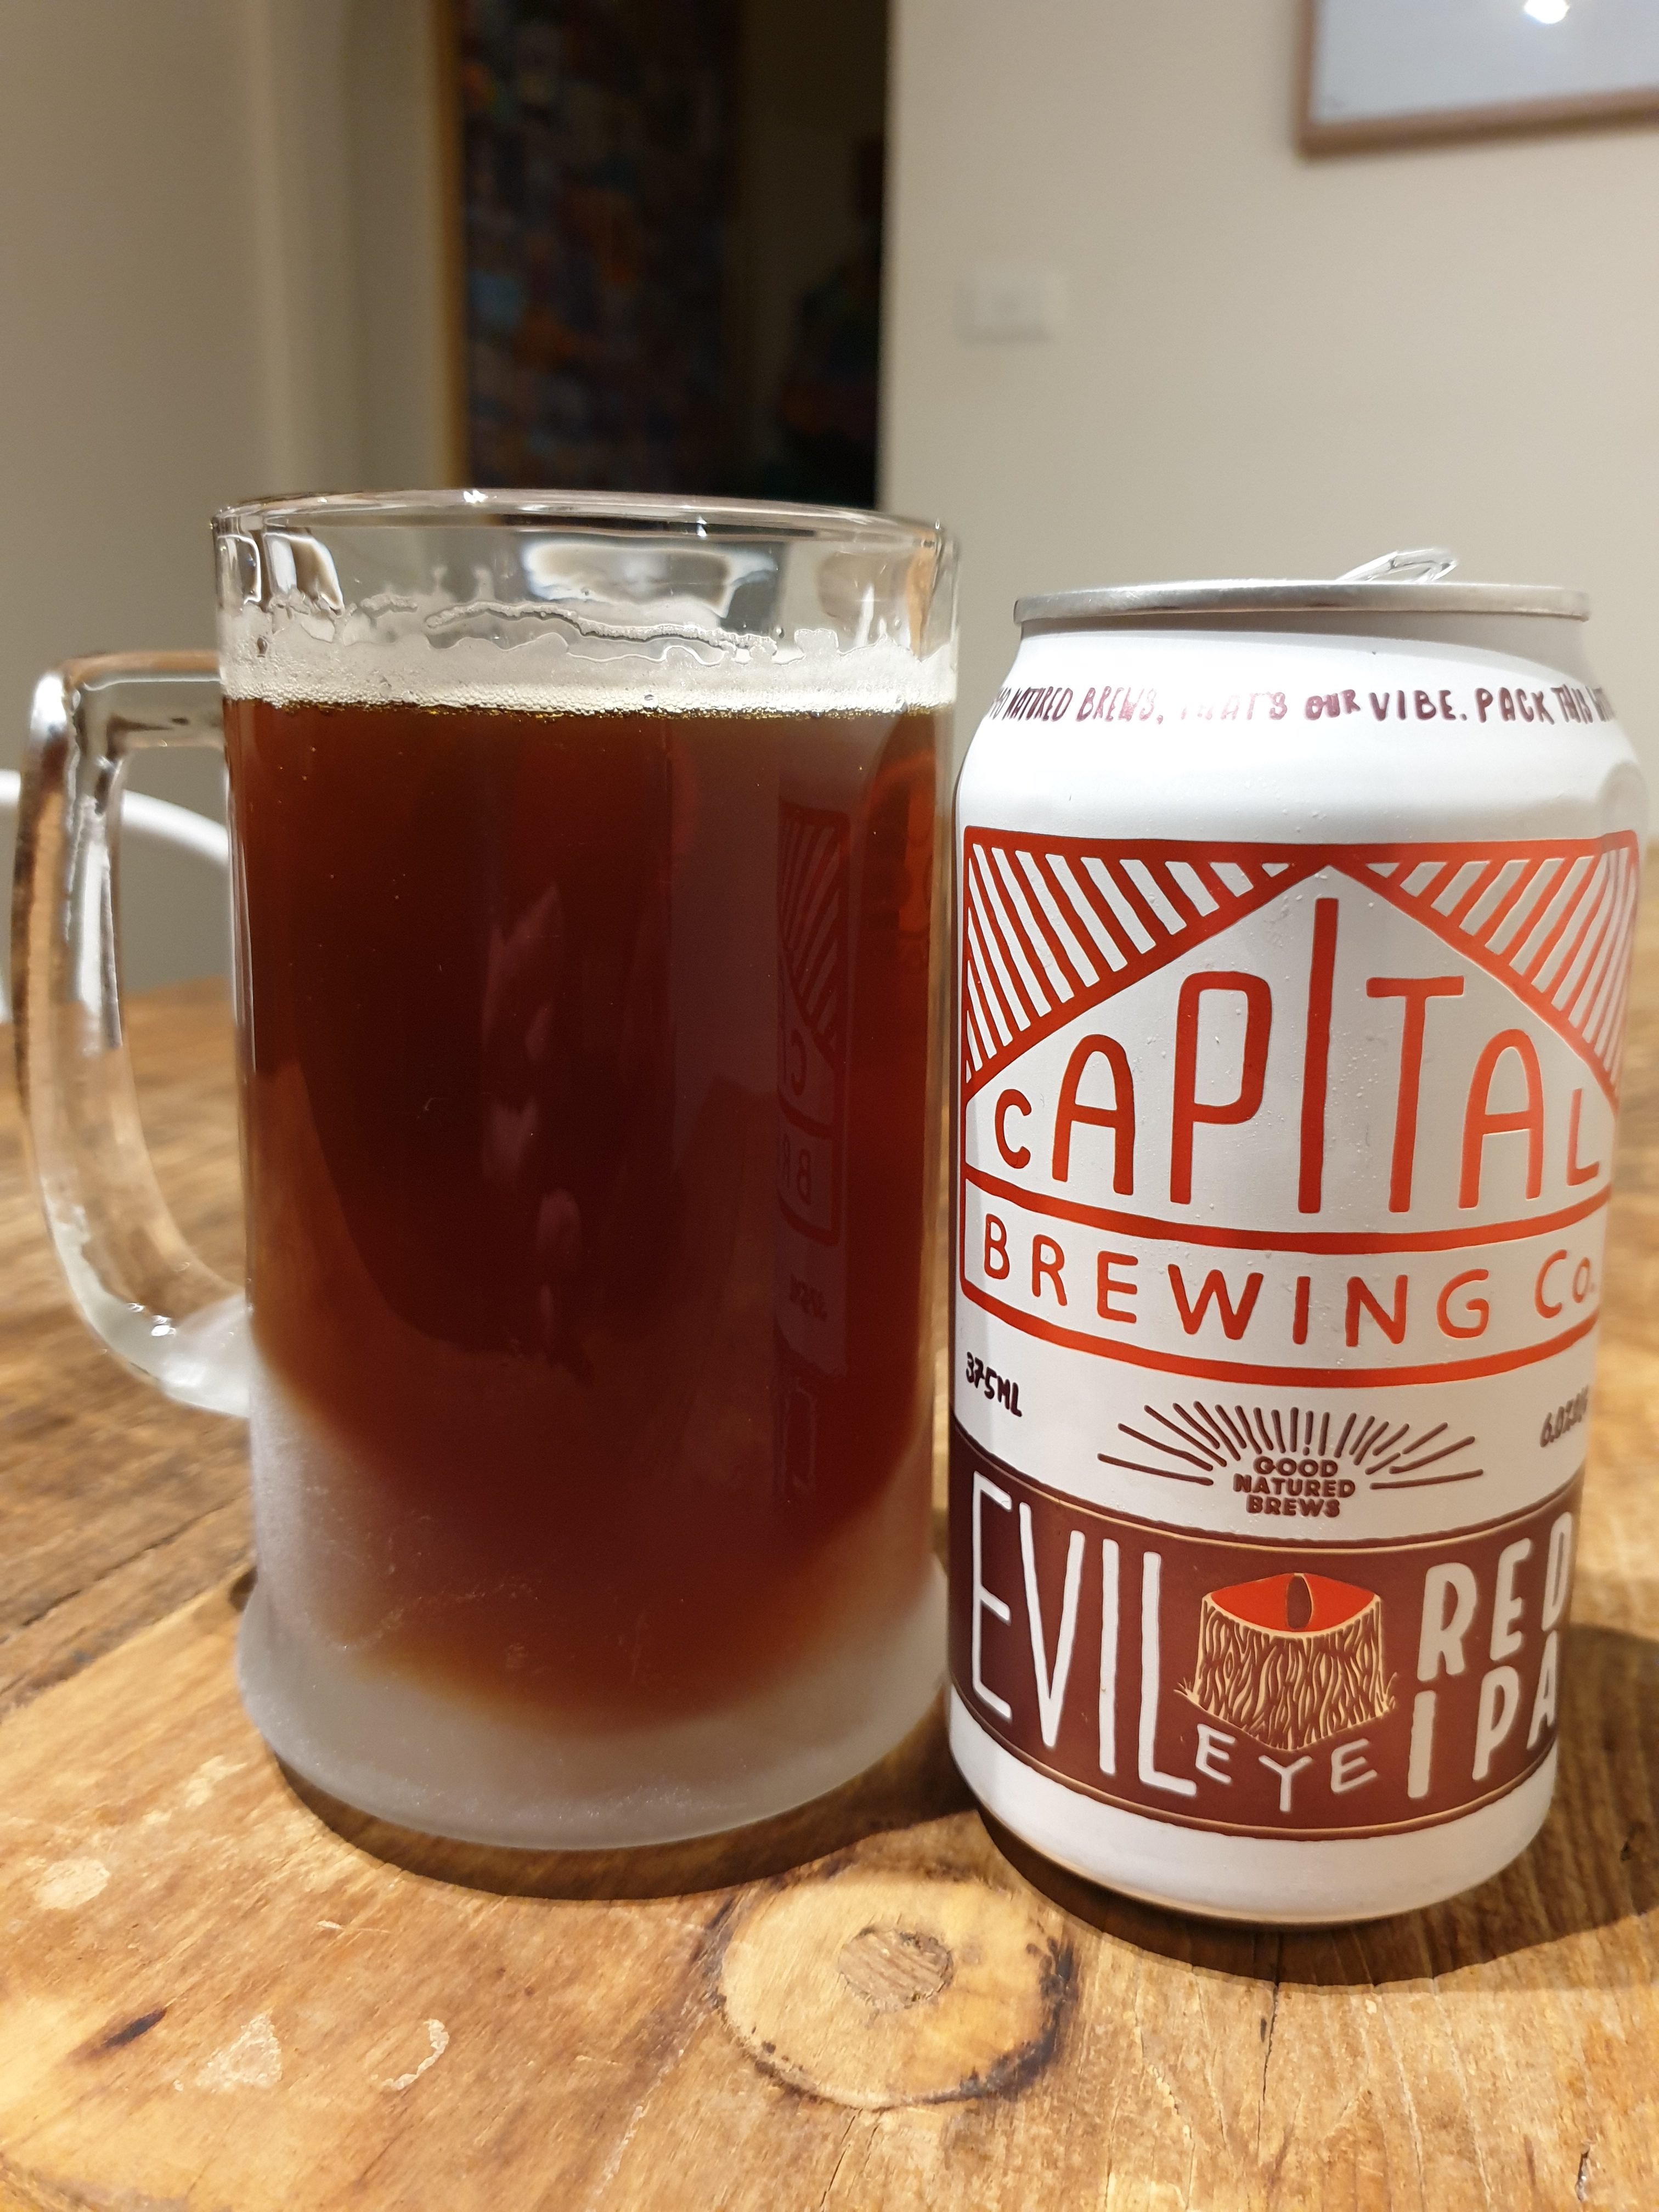 Evil Eye Red IPA by Capital Brewing Co.